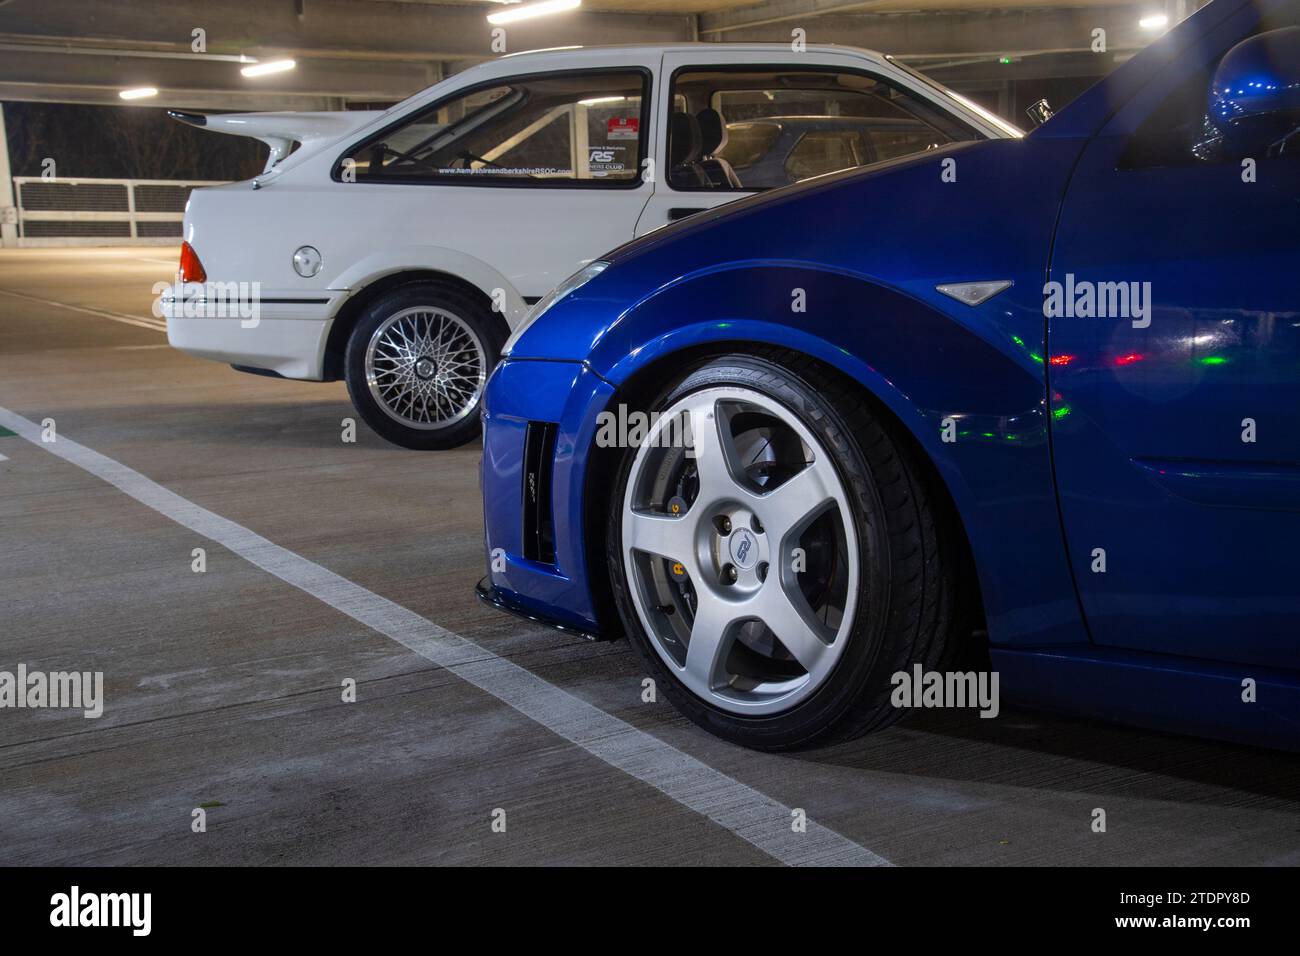 Mk1 Ford Focus RS and 3 door Ford Sierra Cosworth modern classic performance Ford cars Stock Photo